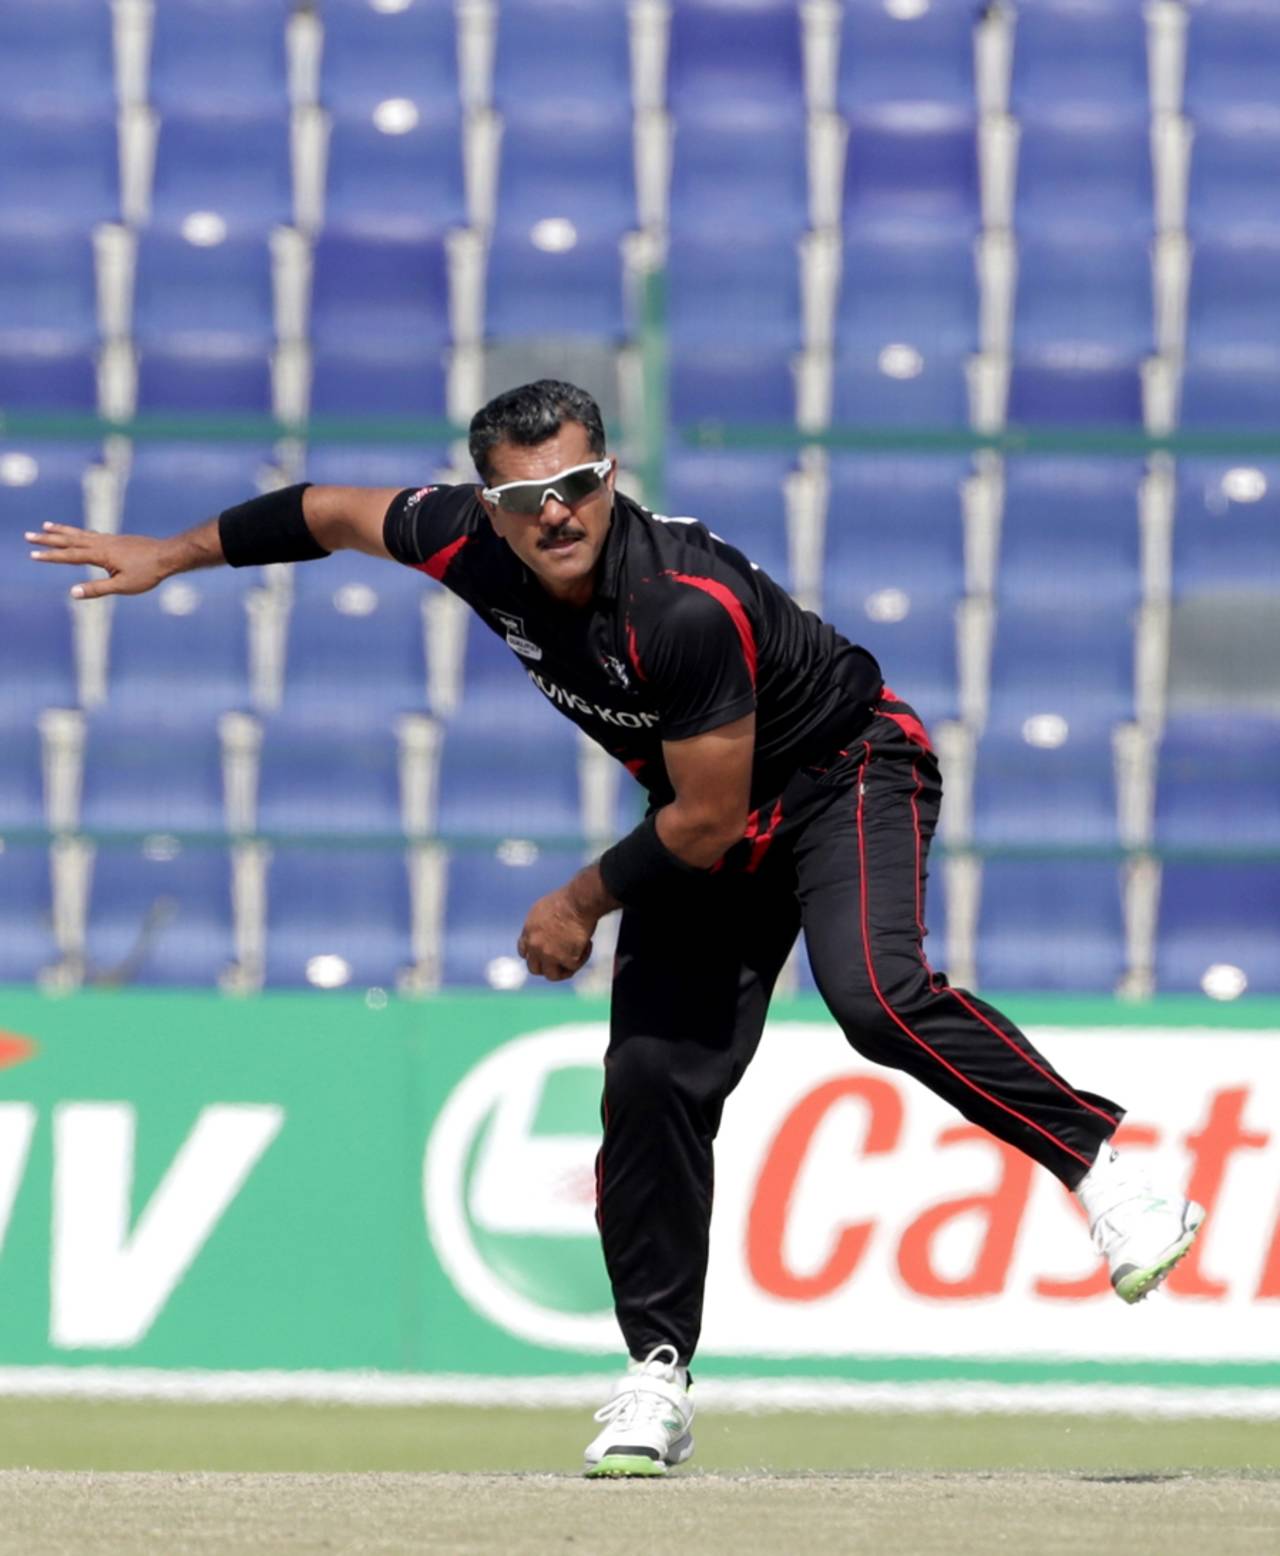 Moner Ahmed bowling during the Papua New Guinea v Hong Kong Qualifying Final match at the ICC World Twenty20 Qualifiers at the Zayed Cricket Stadium on November 28, 2013 in Abu Dhabi, United Arab Emirates. (Photo by Graham Crouch-IDI/IDI via Getty Images)